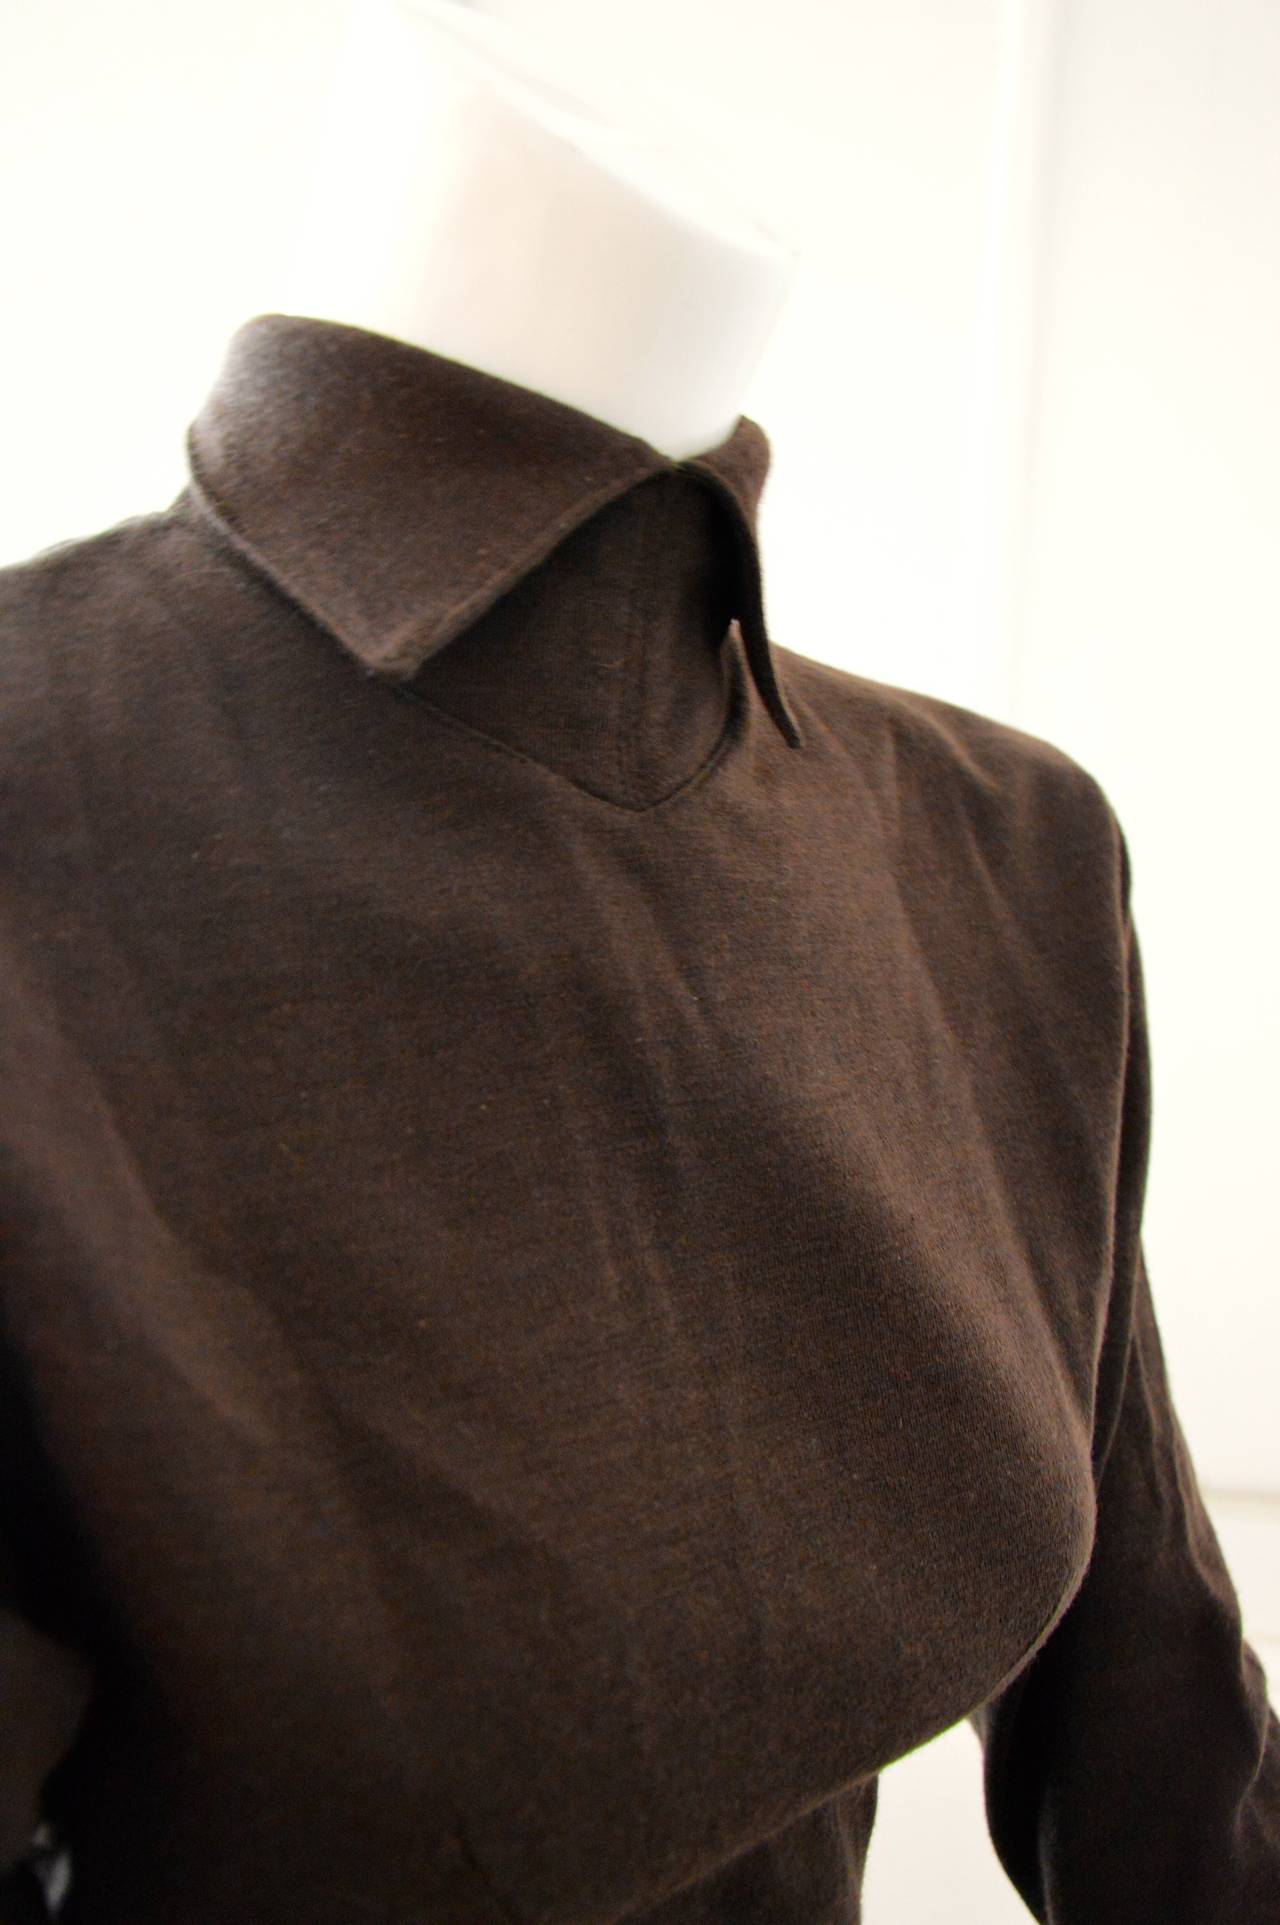 Unic 1980s Alaia Dark Brown Wool Jersey Sophisticated Day Dress 1